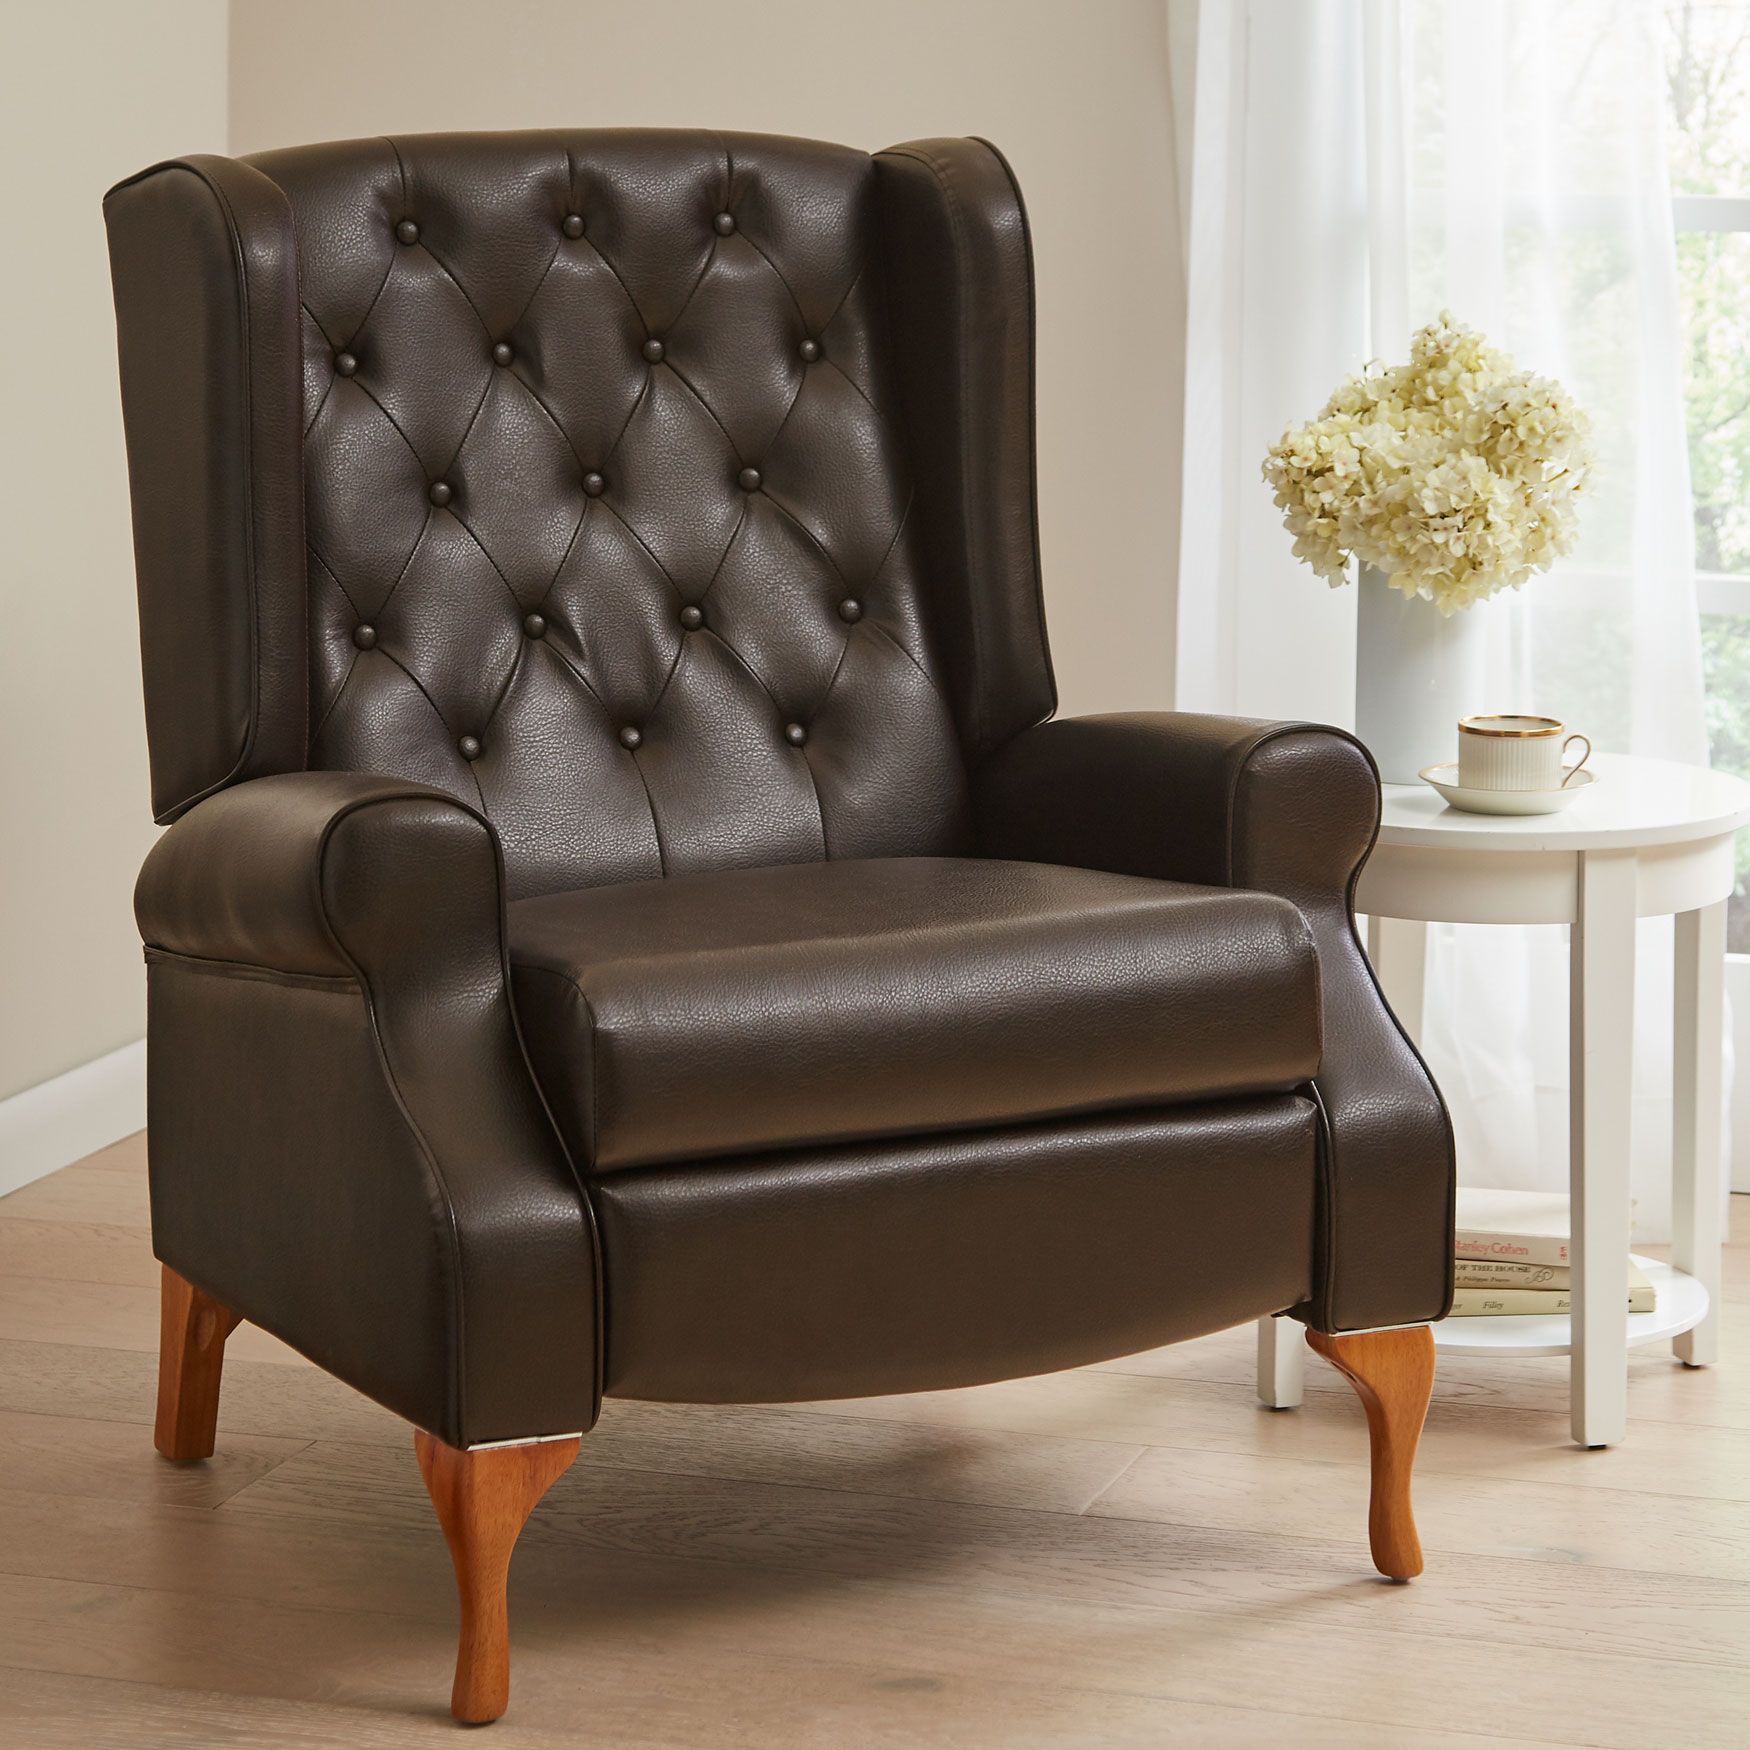 Oversized Queen Anne Style Tufted Wingback Recliner, 